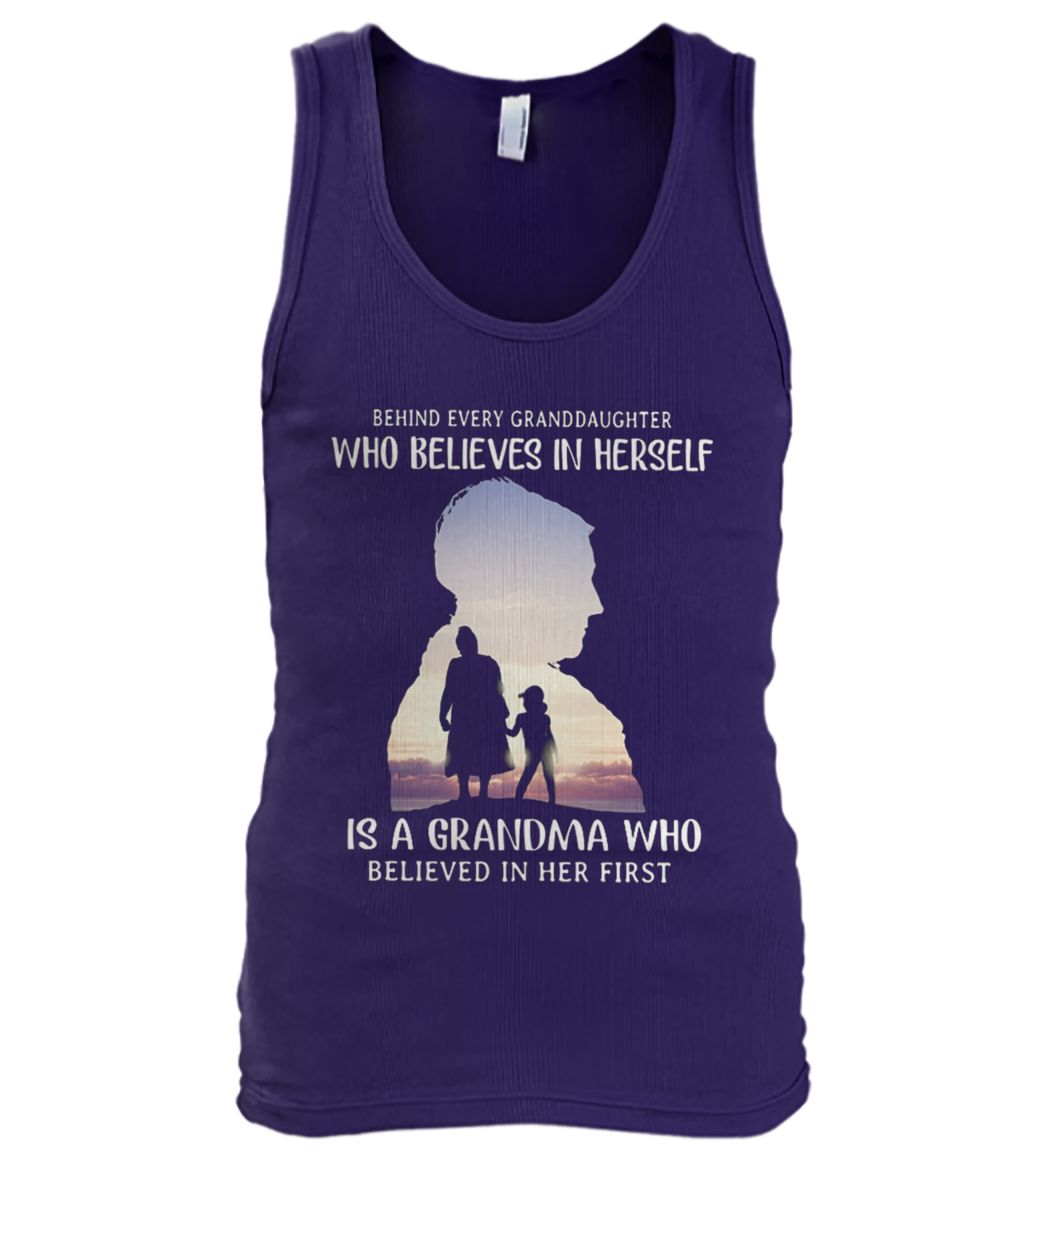 Behind every granddaughter who believes in herself is a grandma who believed in her first men's tank top